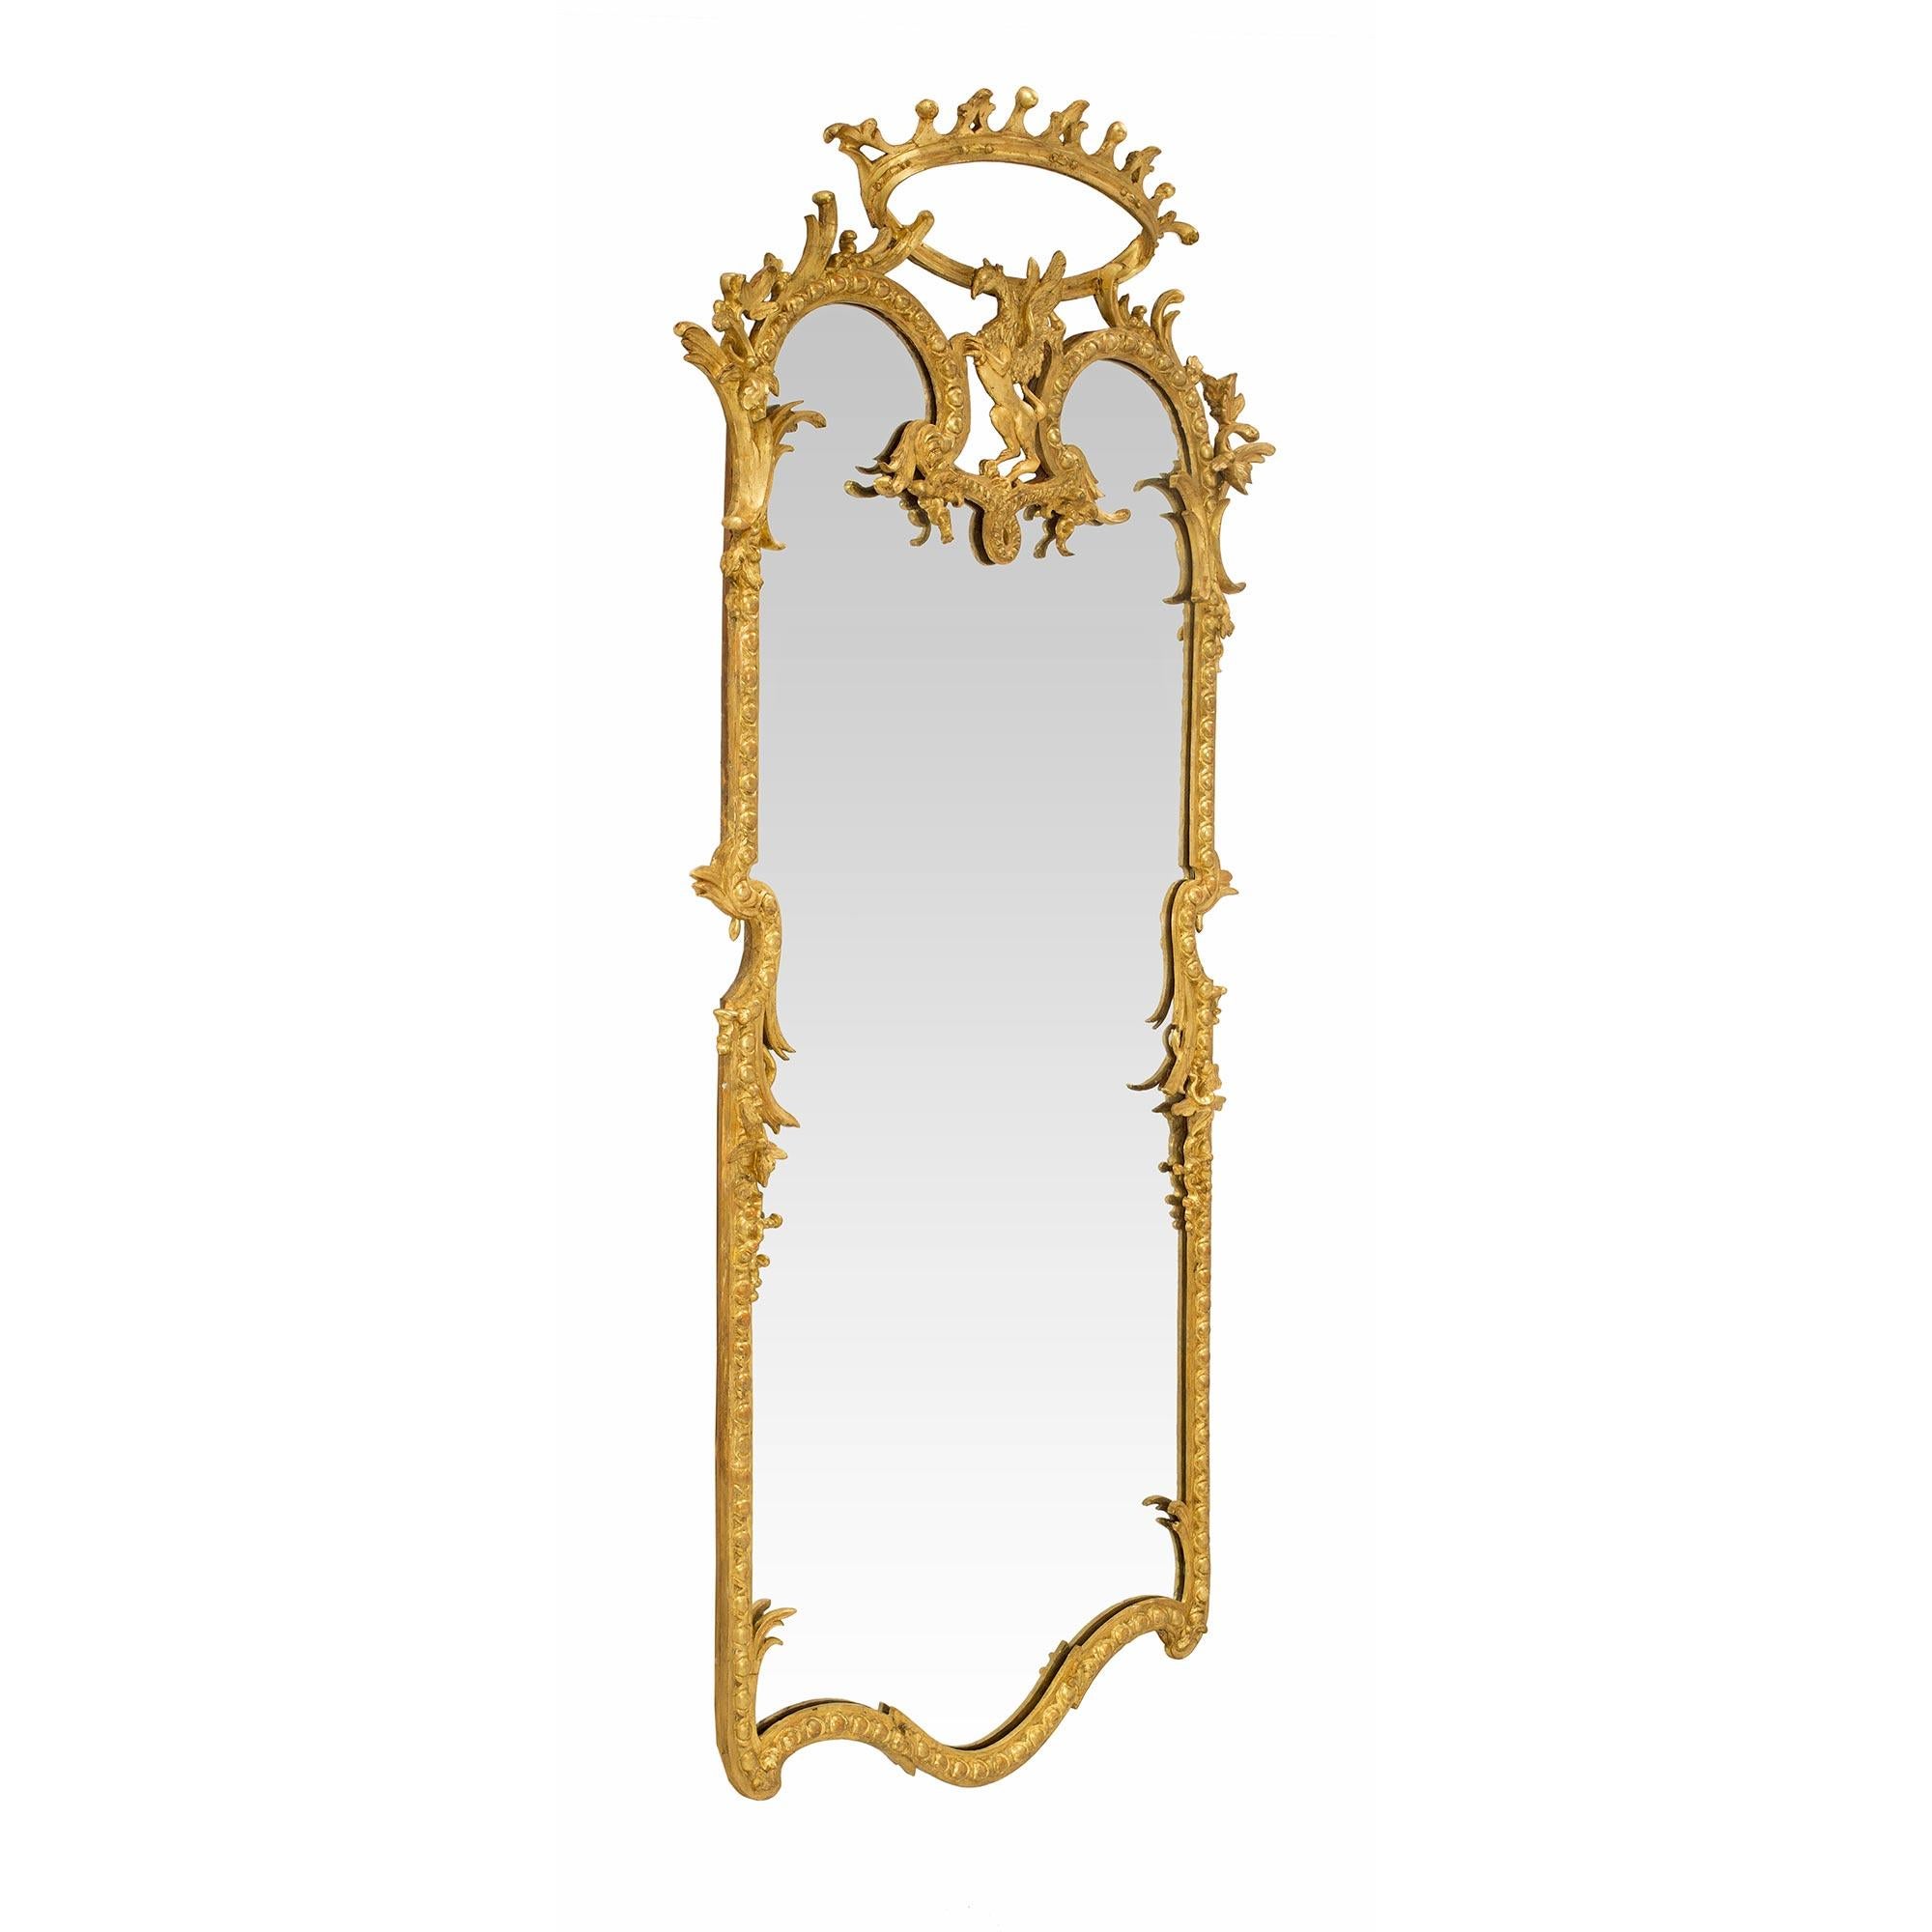 A sensational and uniquely shaped Italian Louis XIV st. 19th century giltwood mirror. The elongated giltwood frame has an arbalest shaped bottom with an egg and dart design. At each side are richly chased acanthus leaves and concave designs with